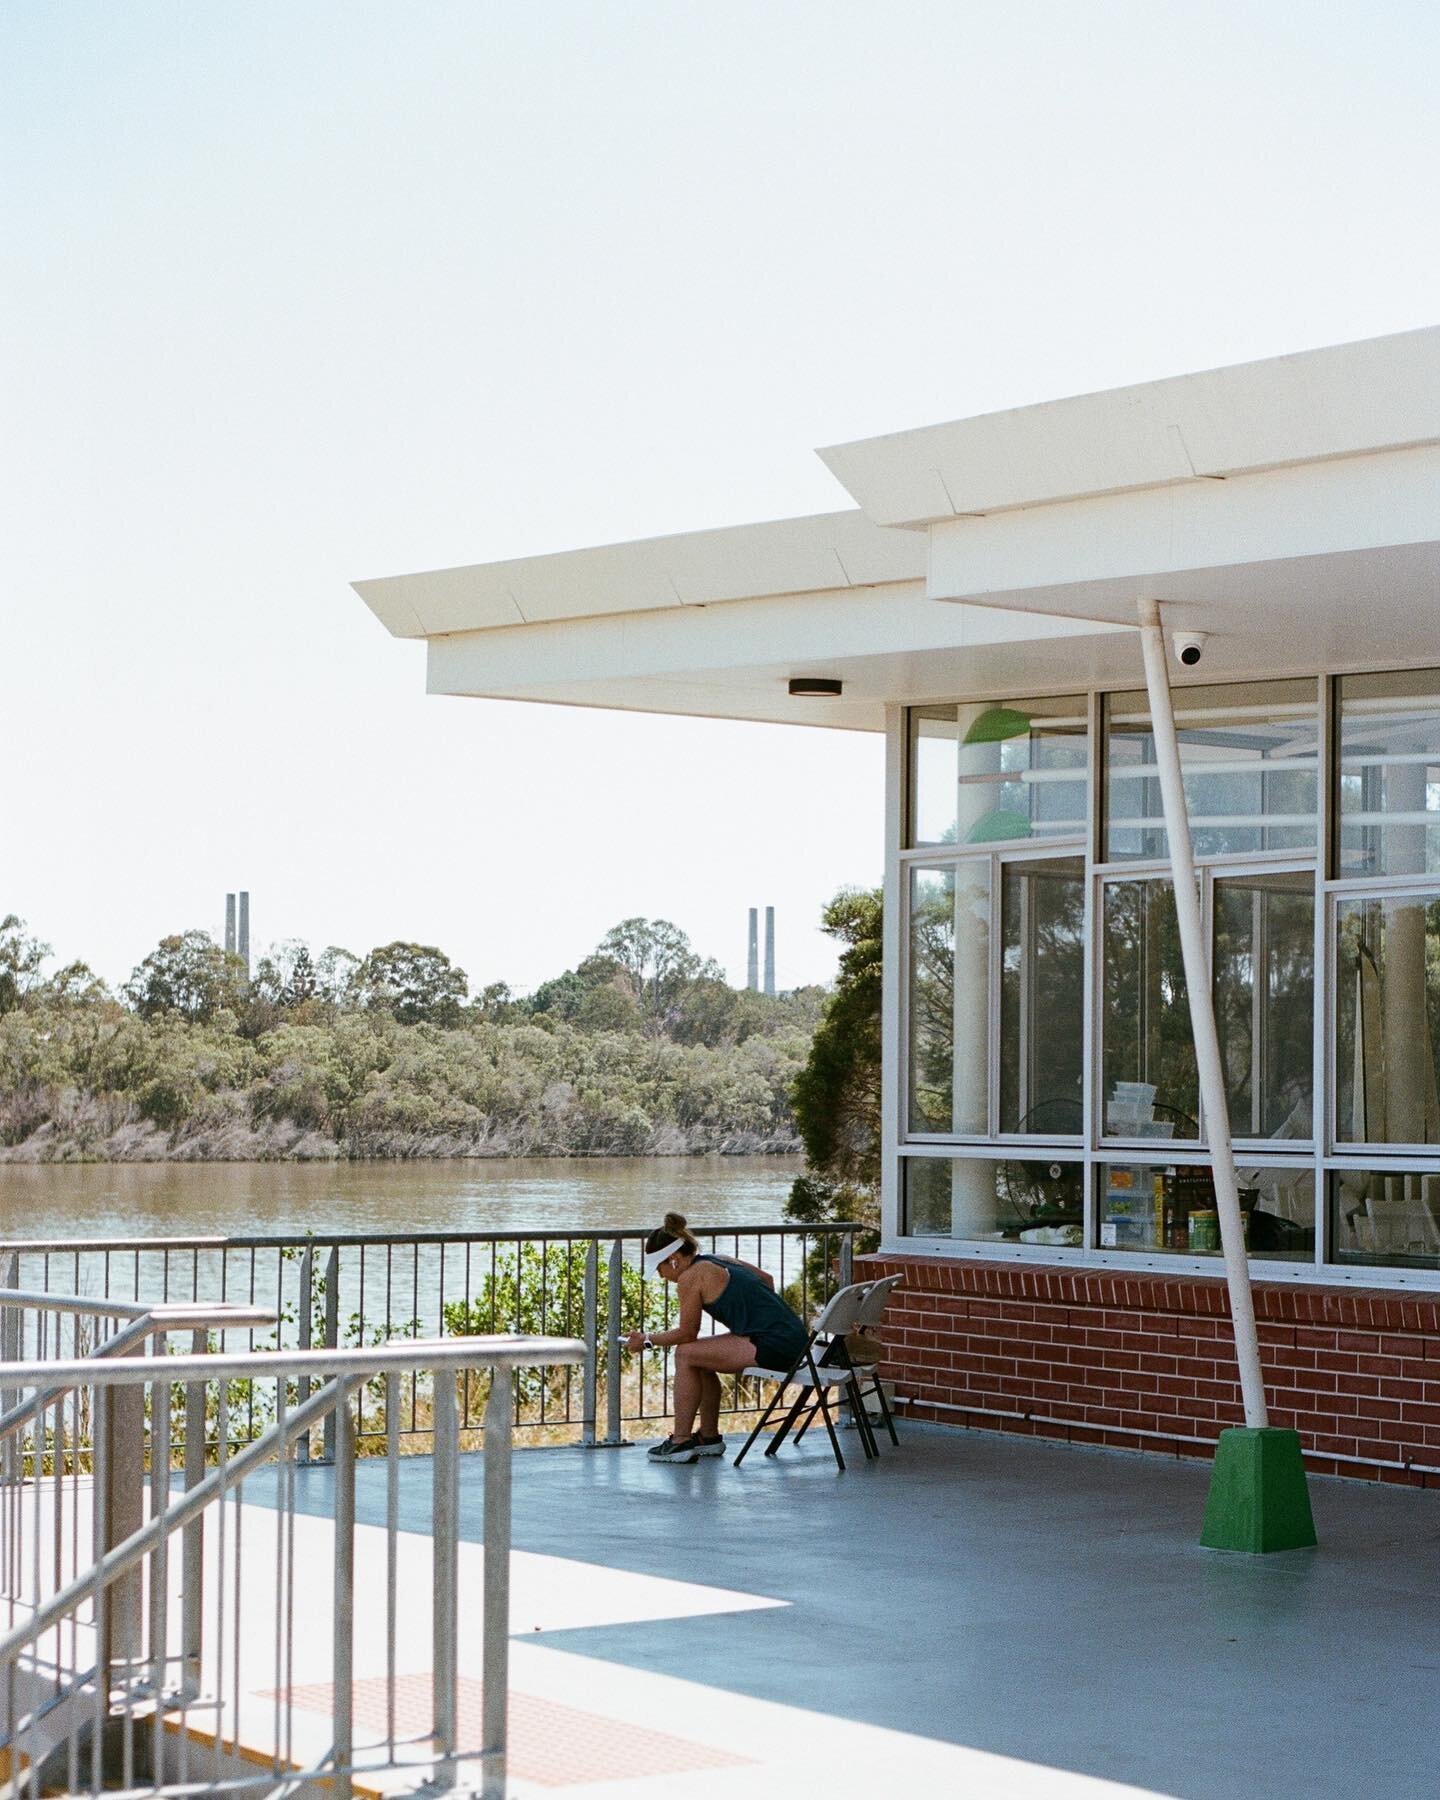 Somerville House Rowing Club: 20 year anniversary. 

Completed in 2003 by Croft Architects, this small sports facility supports the Brisbane River rowing activities for Somerville House school located on the Brisbane Corso. 

The local community also